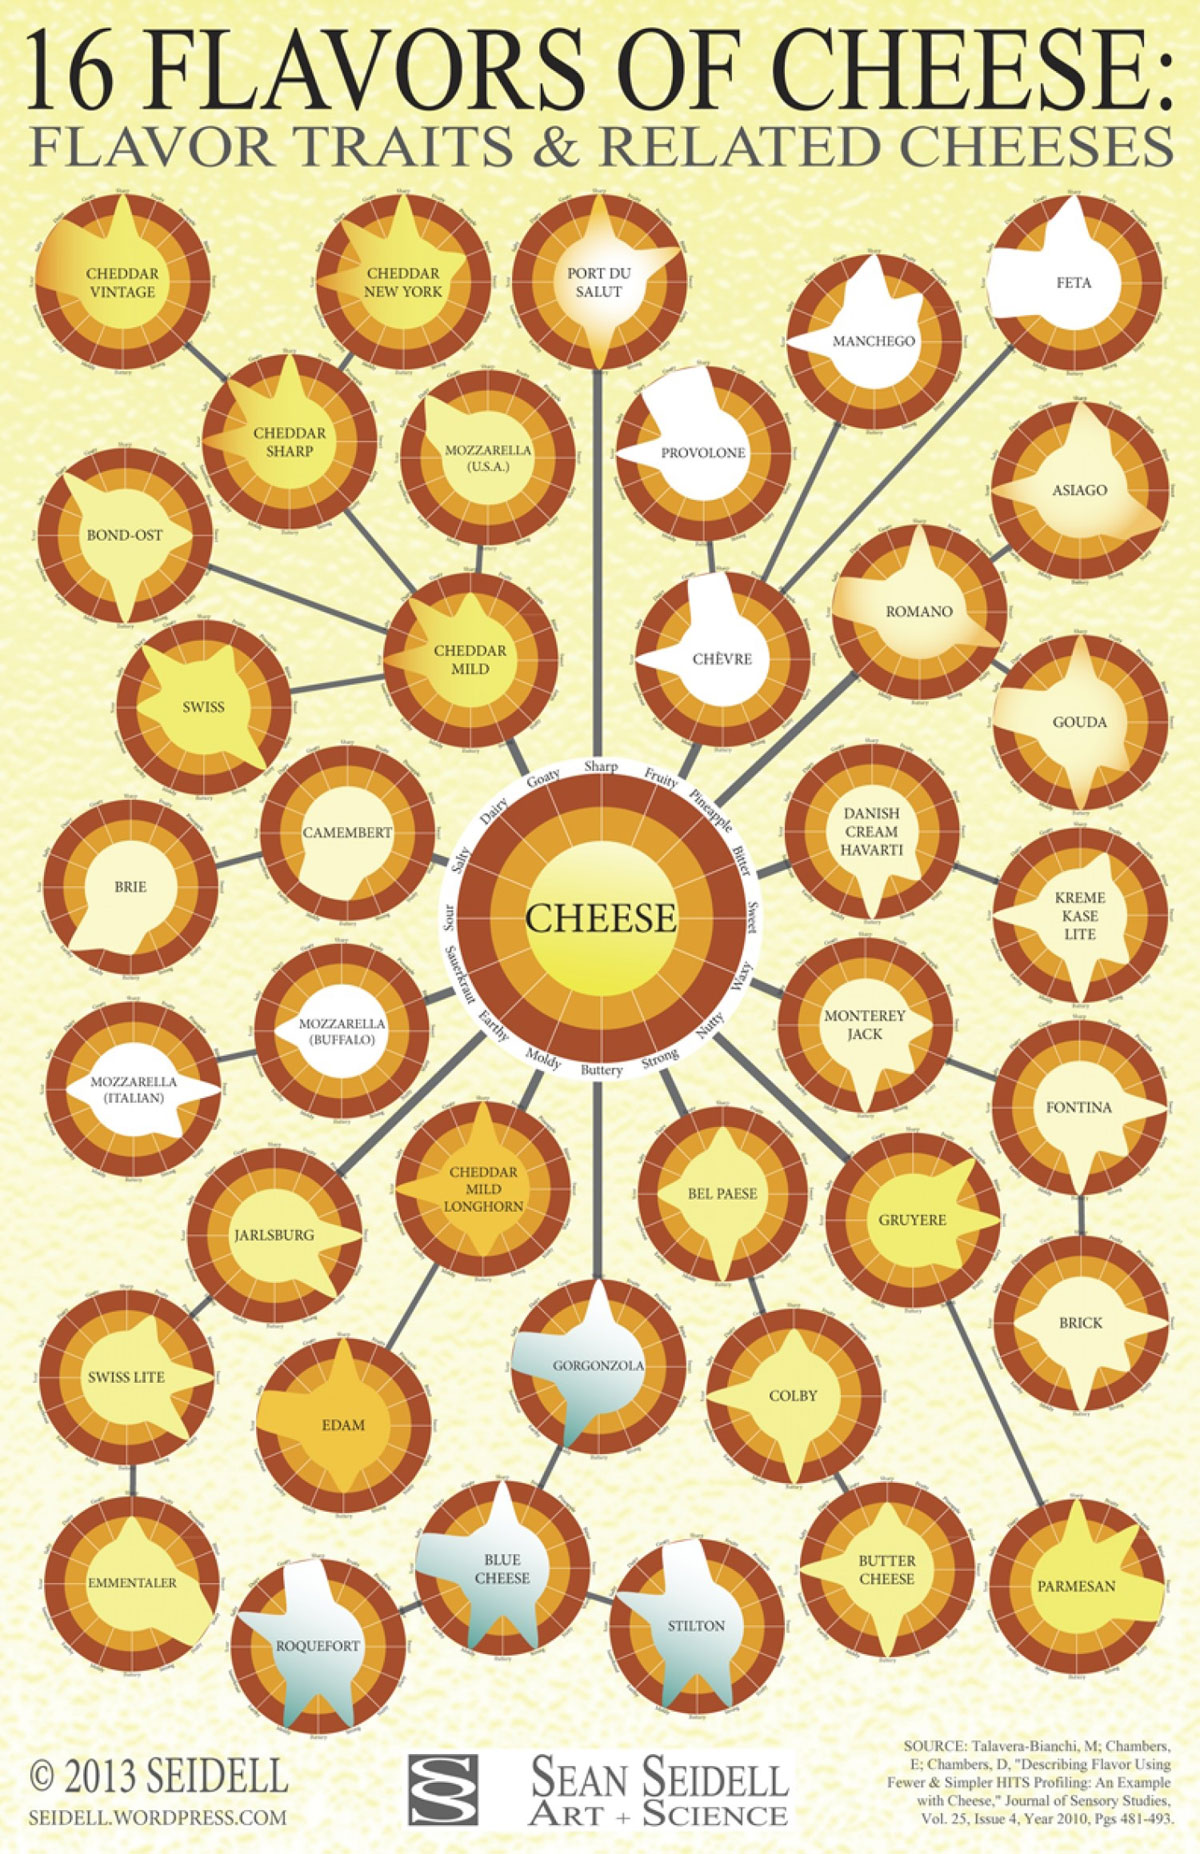 cheese-flavors-and-related-traits by sean seidell